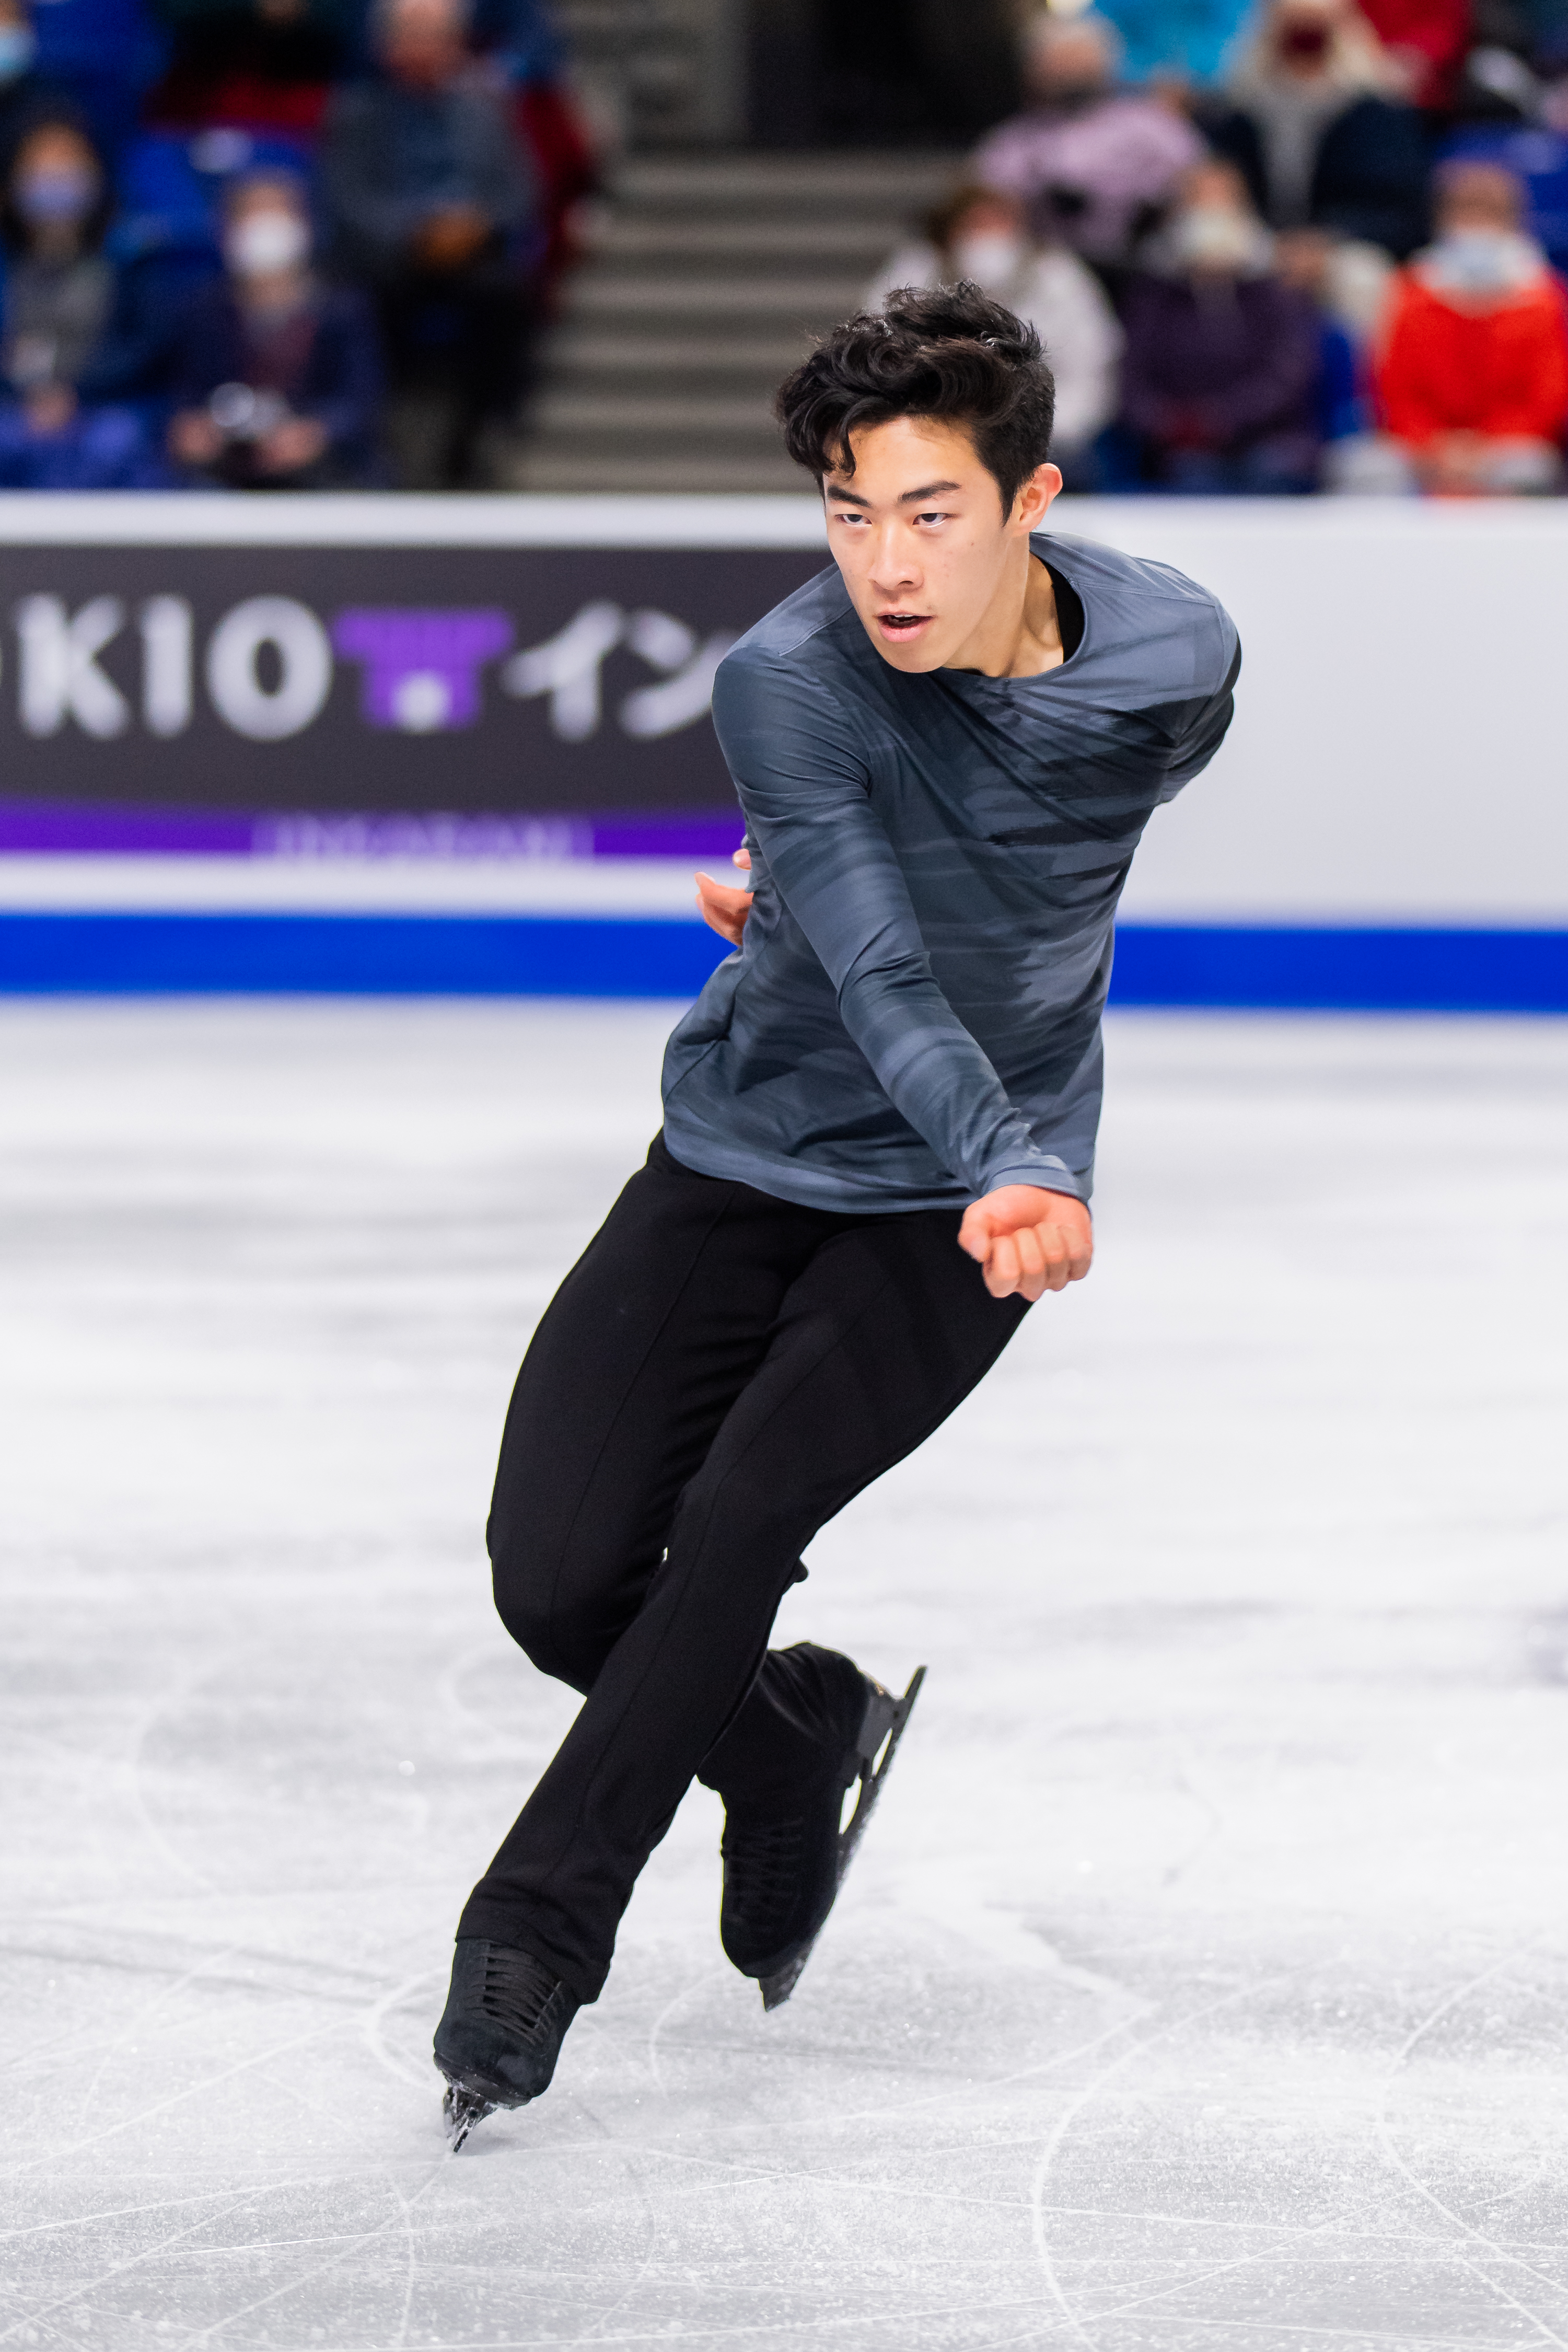 Stars On Ice 2022 at the Amway Arena, Orlando! Featuring Olympic Champion Nathan Chen